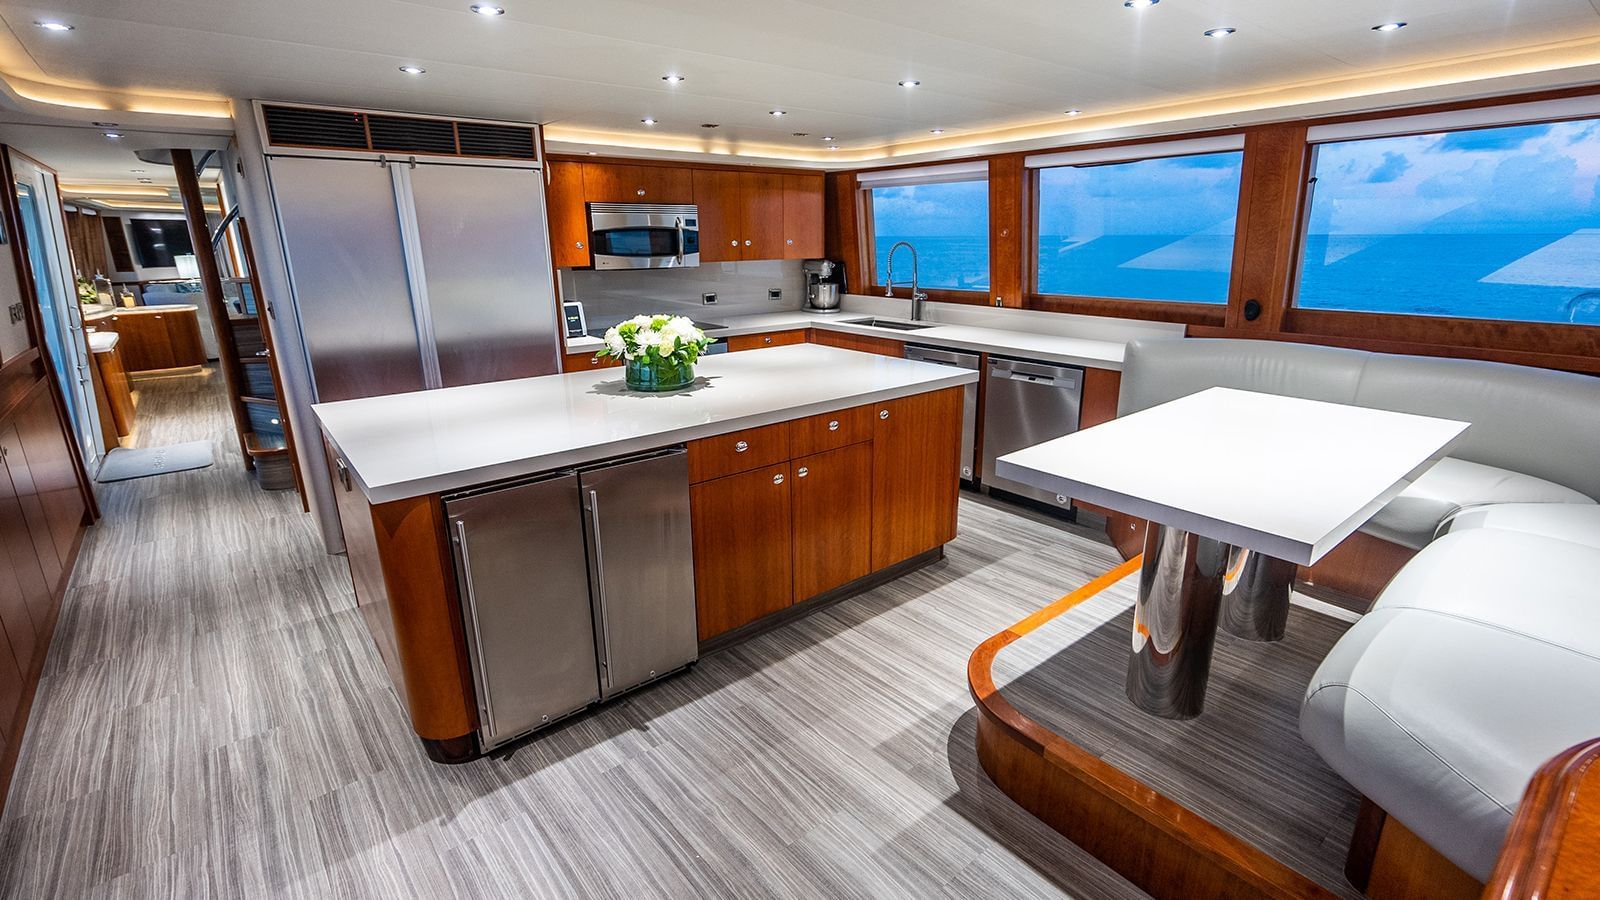 Dine in galley